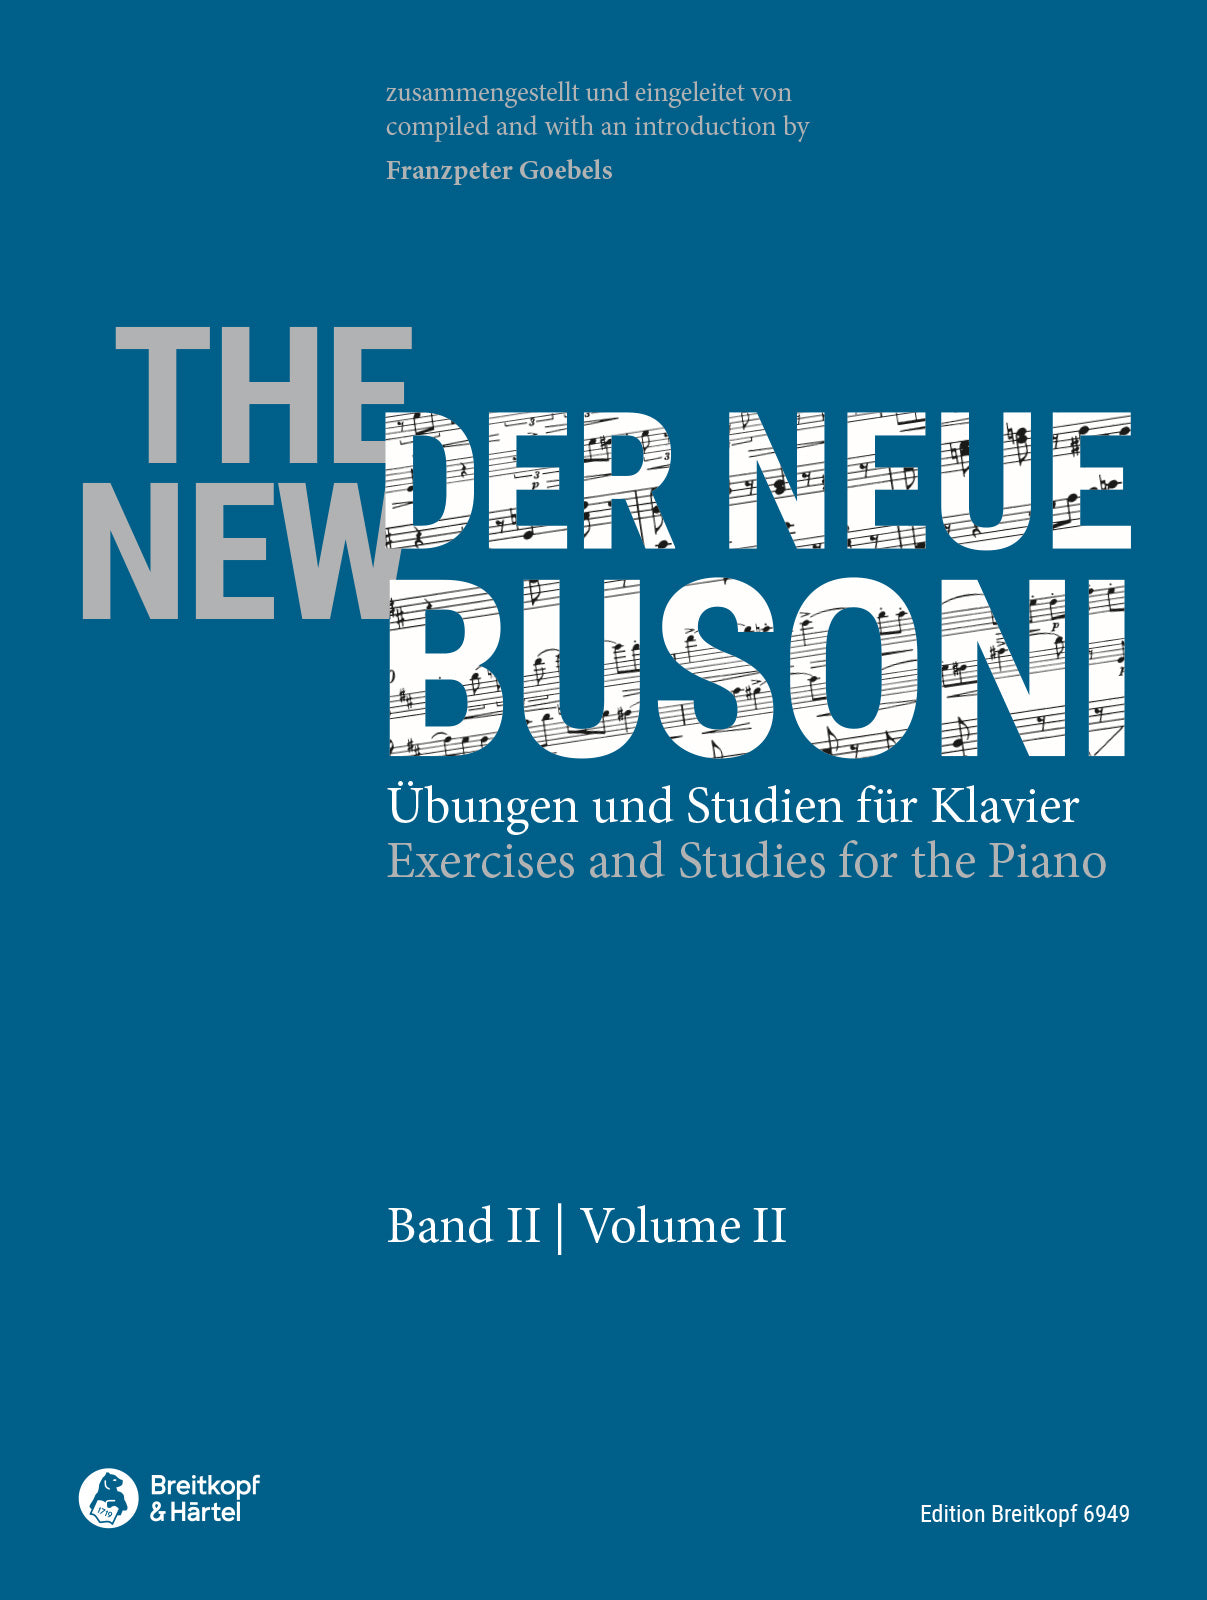 The New Busoni Exercises and Studies for the Piano - Volume 2